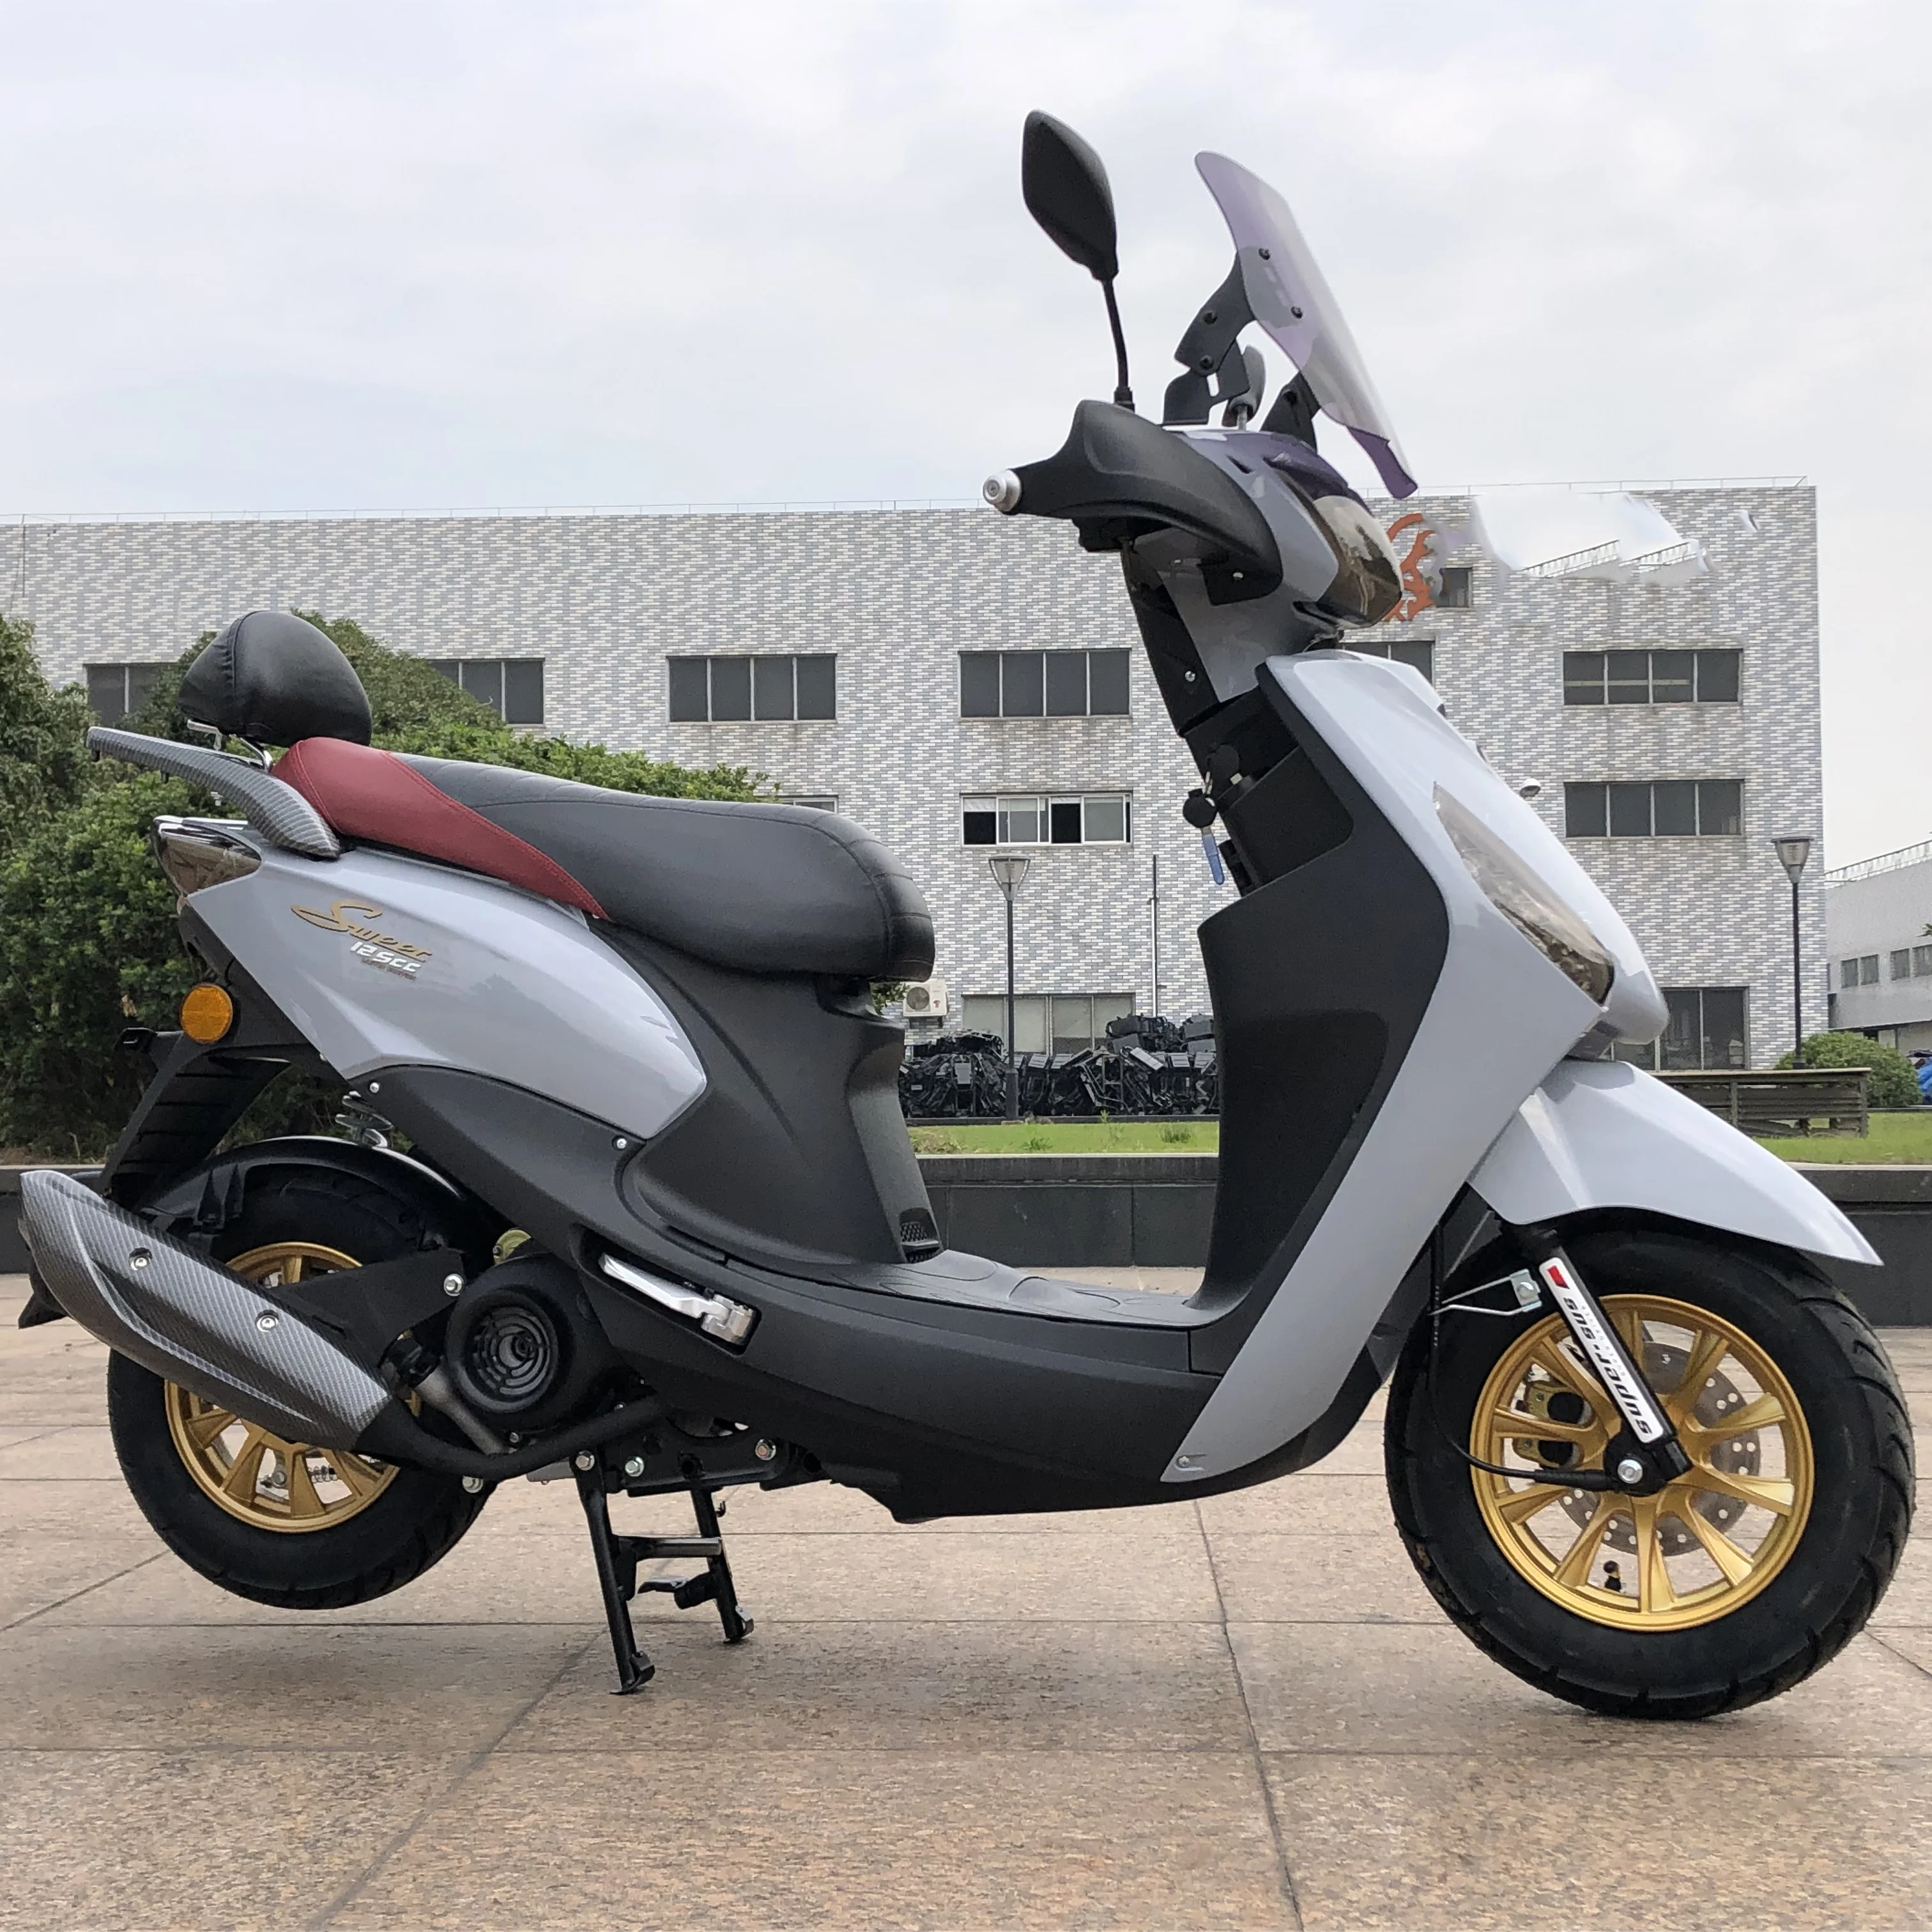 YAMAHA Jog I Scooter S7 110cc Moped Cheap Price Good Quality - China Gas  Scooters, Gas Motorcycles